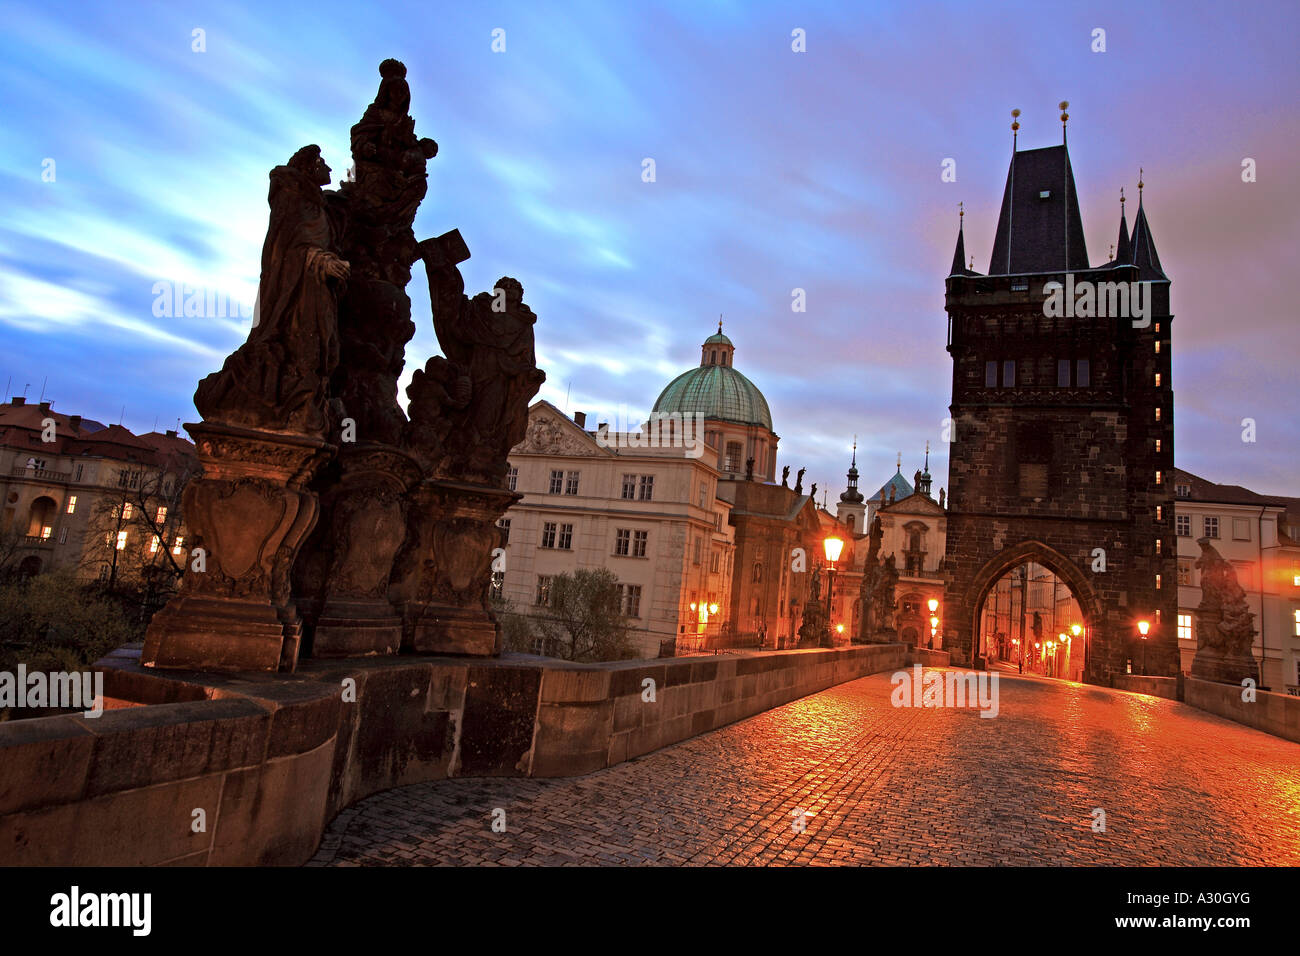 Sunrise At The Old Town Bridge Tower And Statue Of t Dominic And St Thomas Aquinas On The Charles Bridge Prague Czech Republic Stock Photo